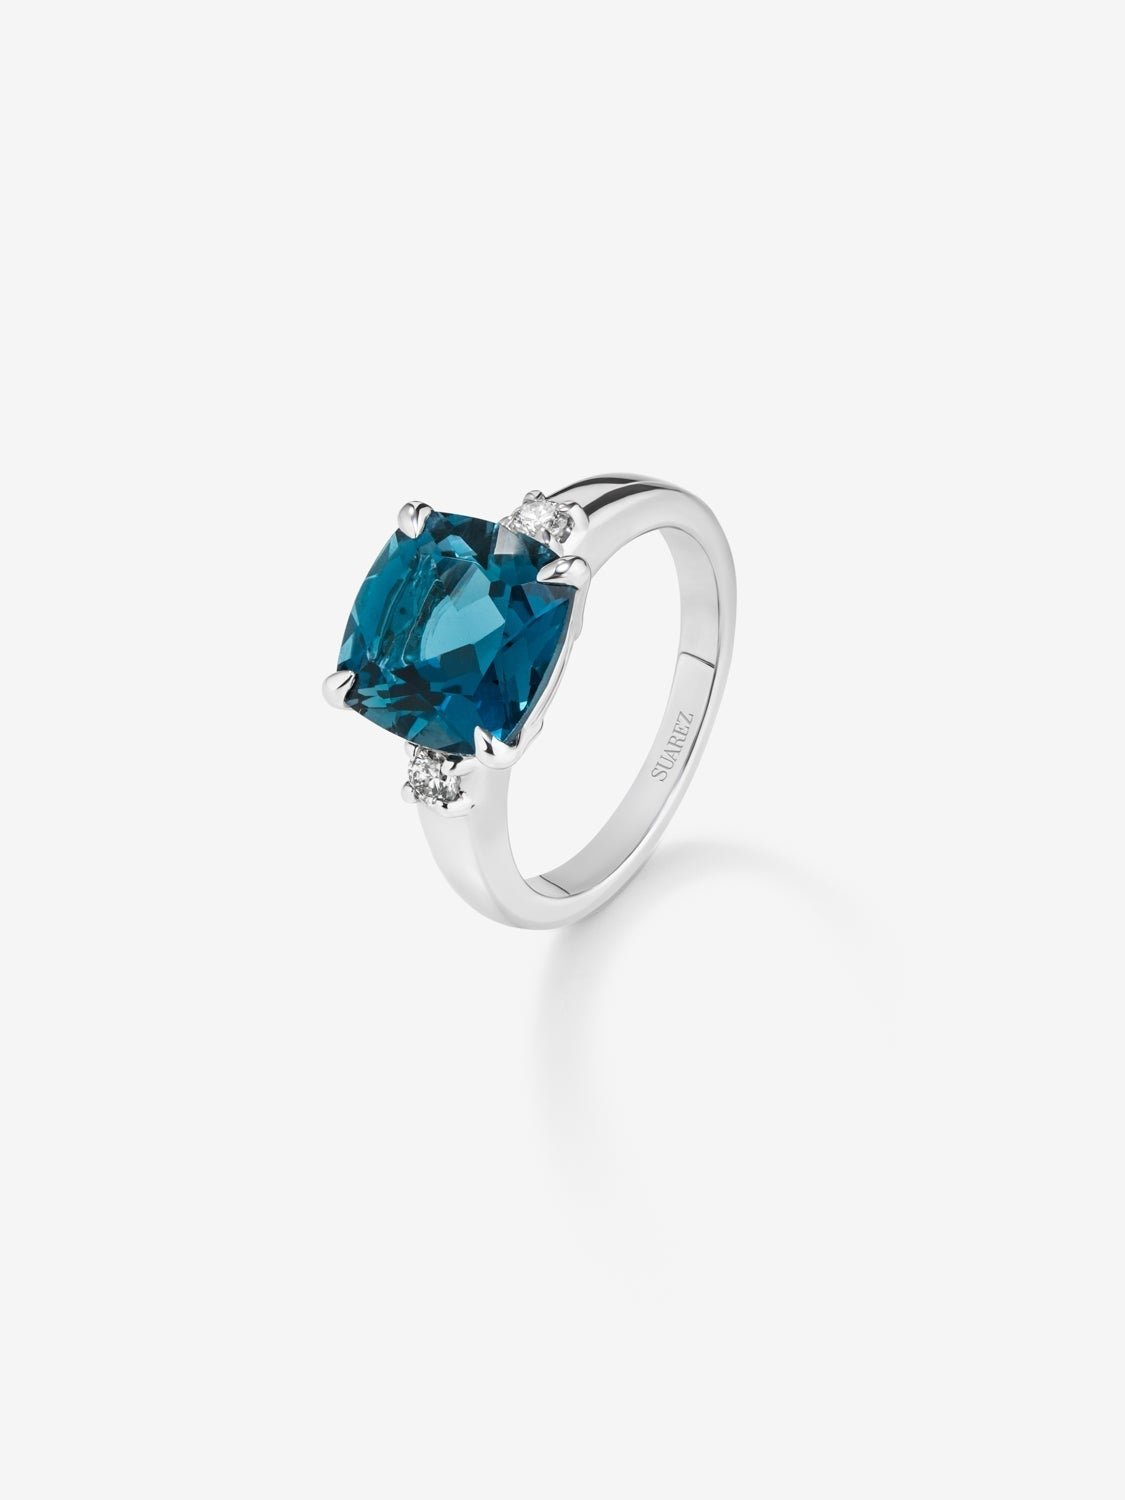 925 silver triple ring with cushion-cut London blue topaz of 5.08 cts and 2 brilliant-cut diamonds with a total of 0.12 cts